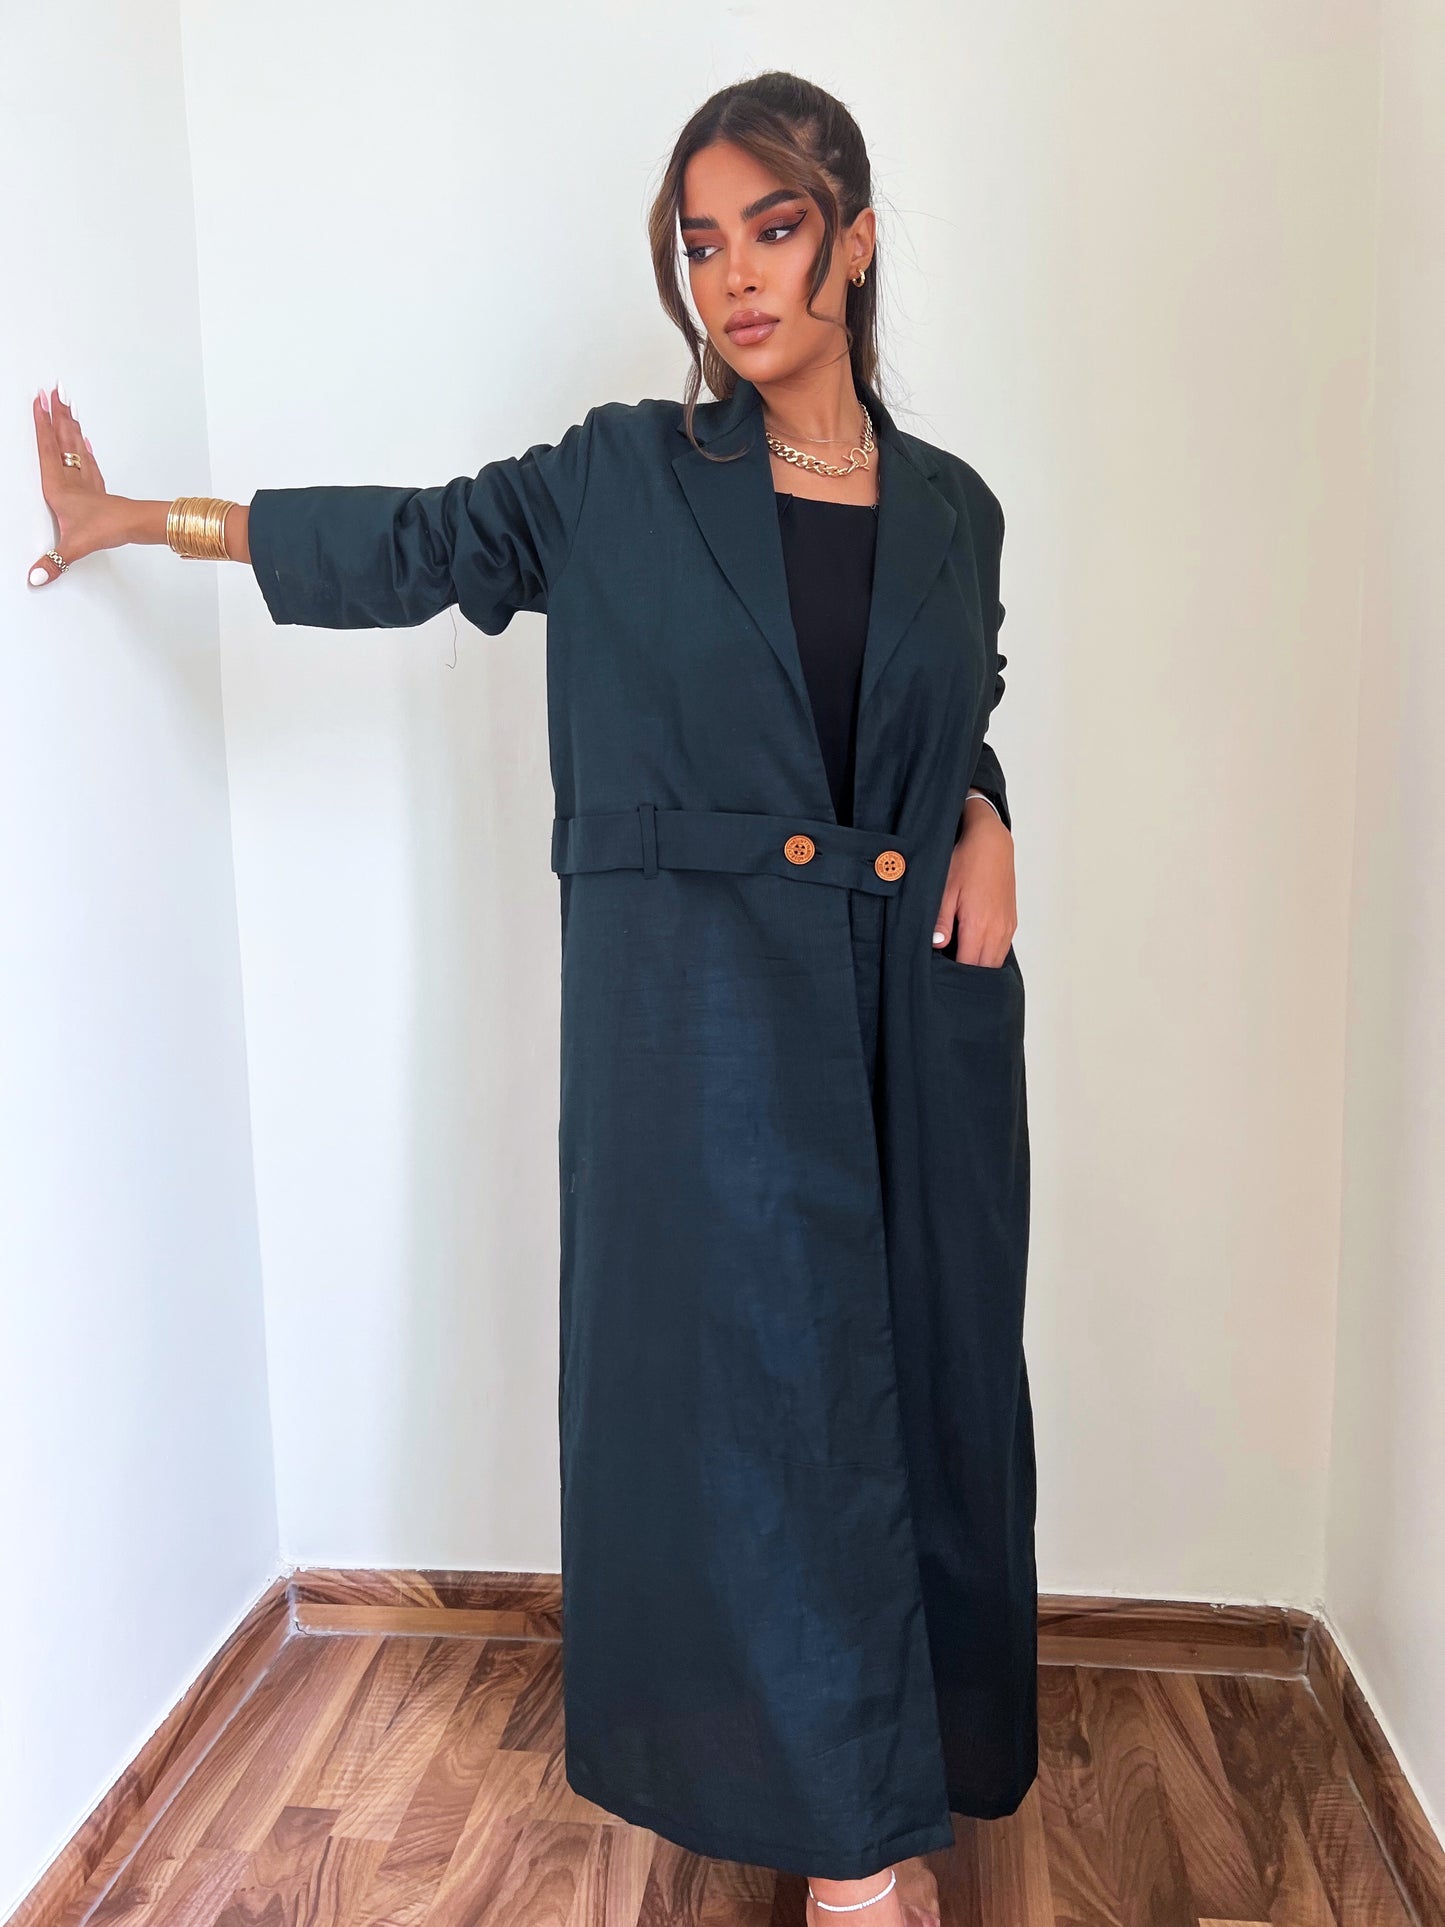 Strictly Business - Suit Blazer Abaya - Online Shopping - The Untitled Project